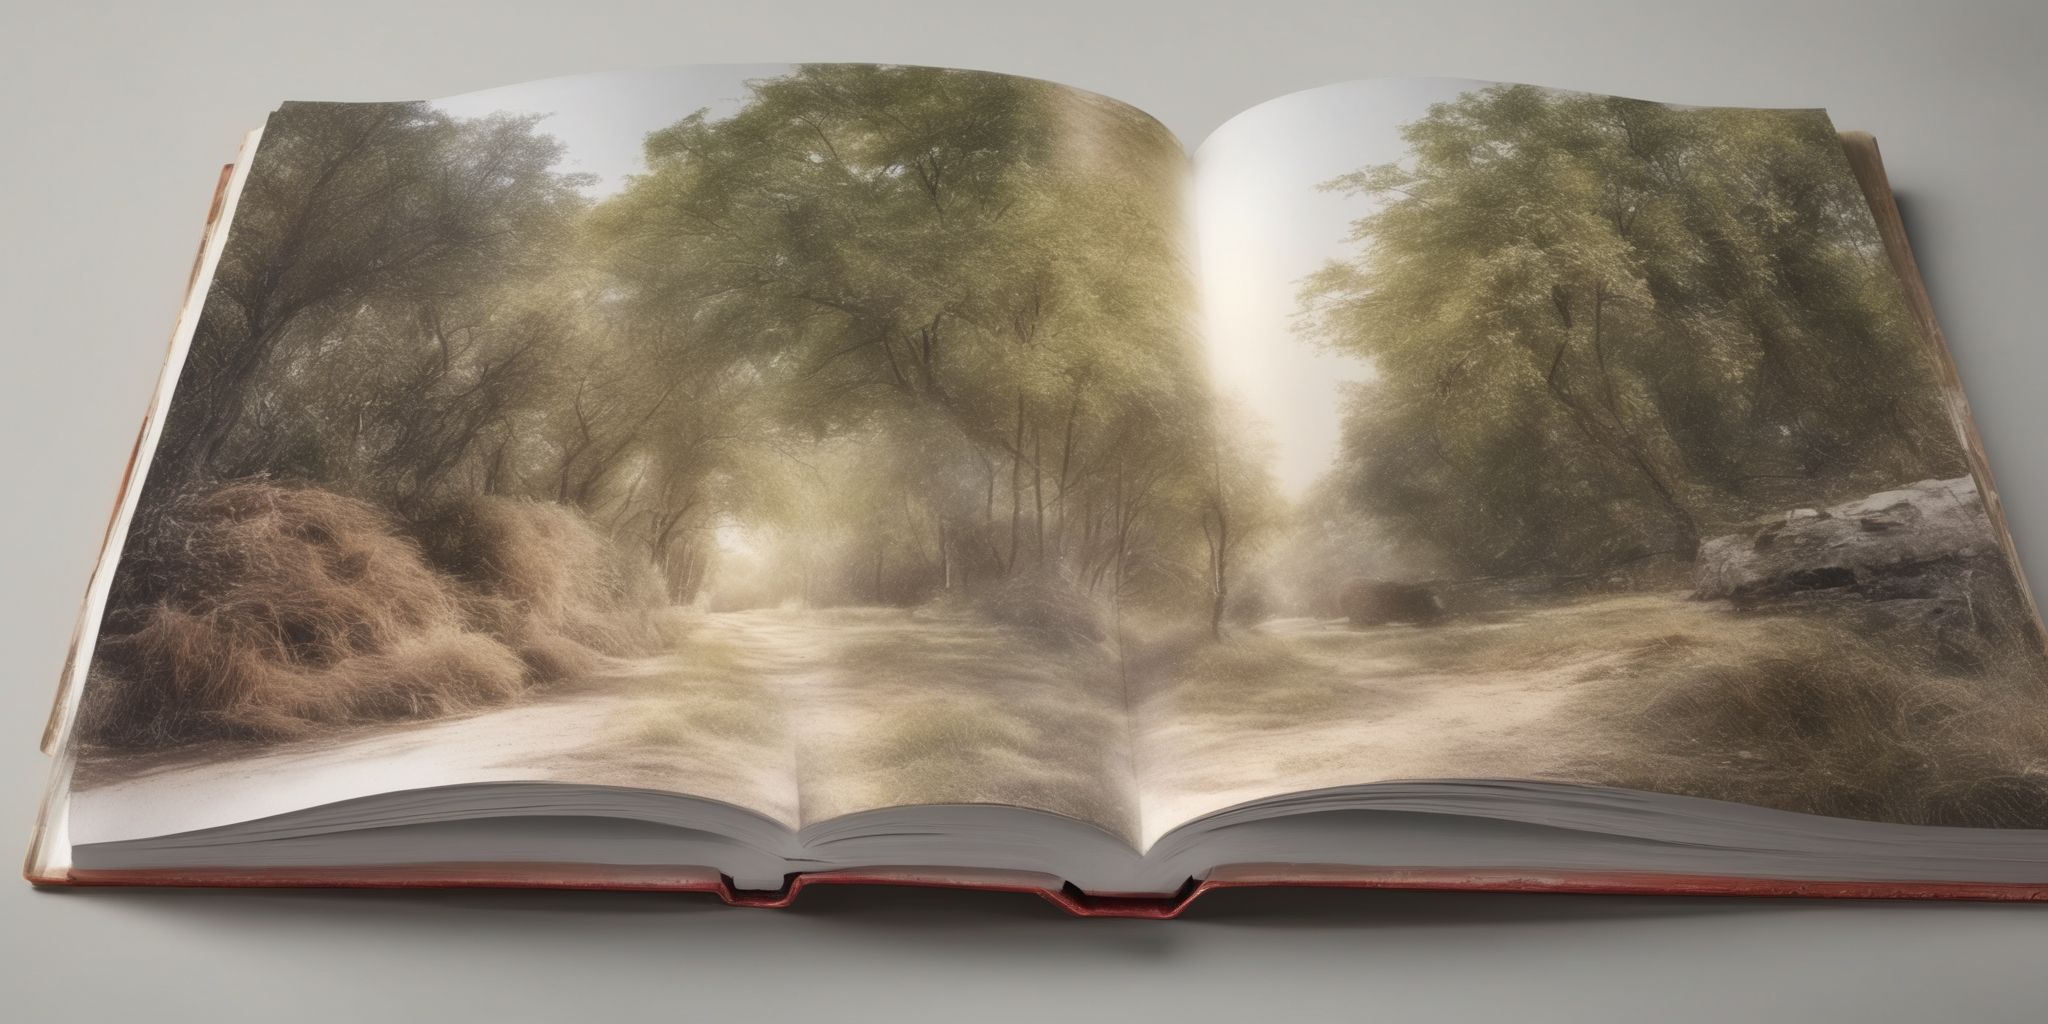 Book  in realistic, photographic style